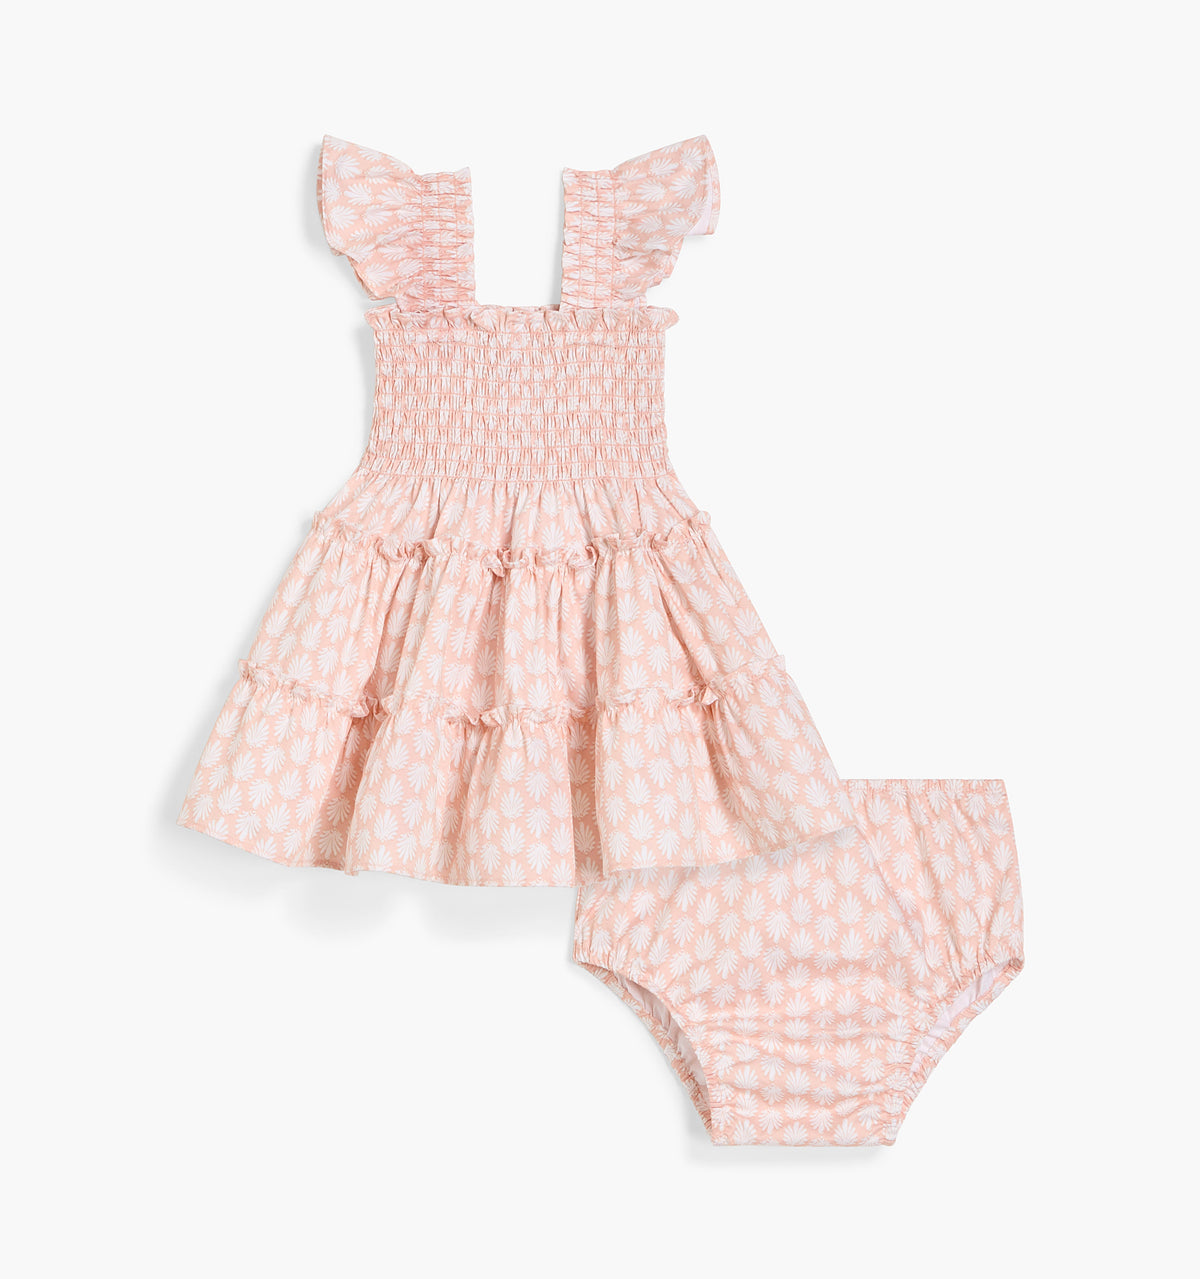 The Baby Ellie Nap Dress in Pale Coral Baroque Shell Cotton Sateen